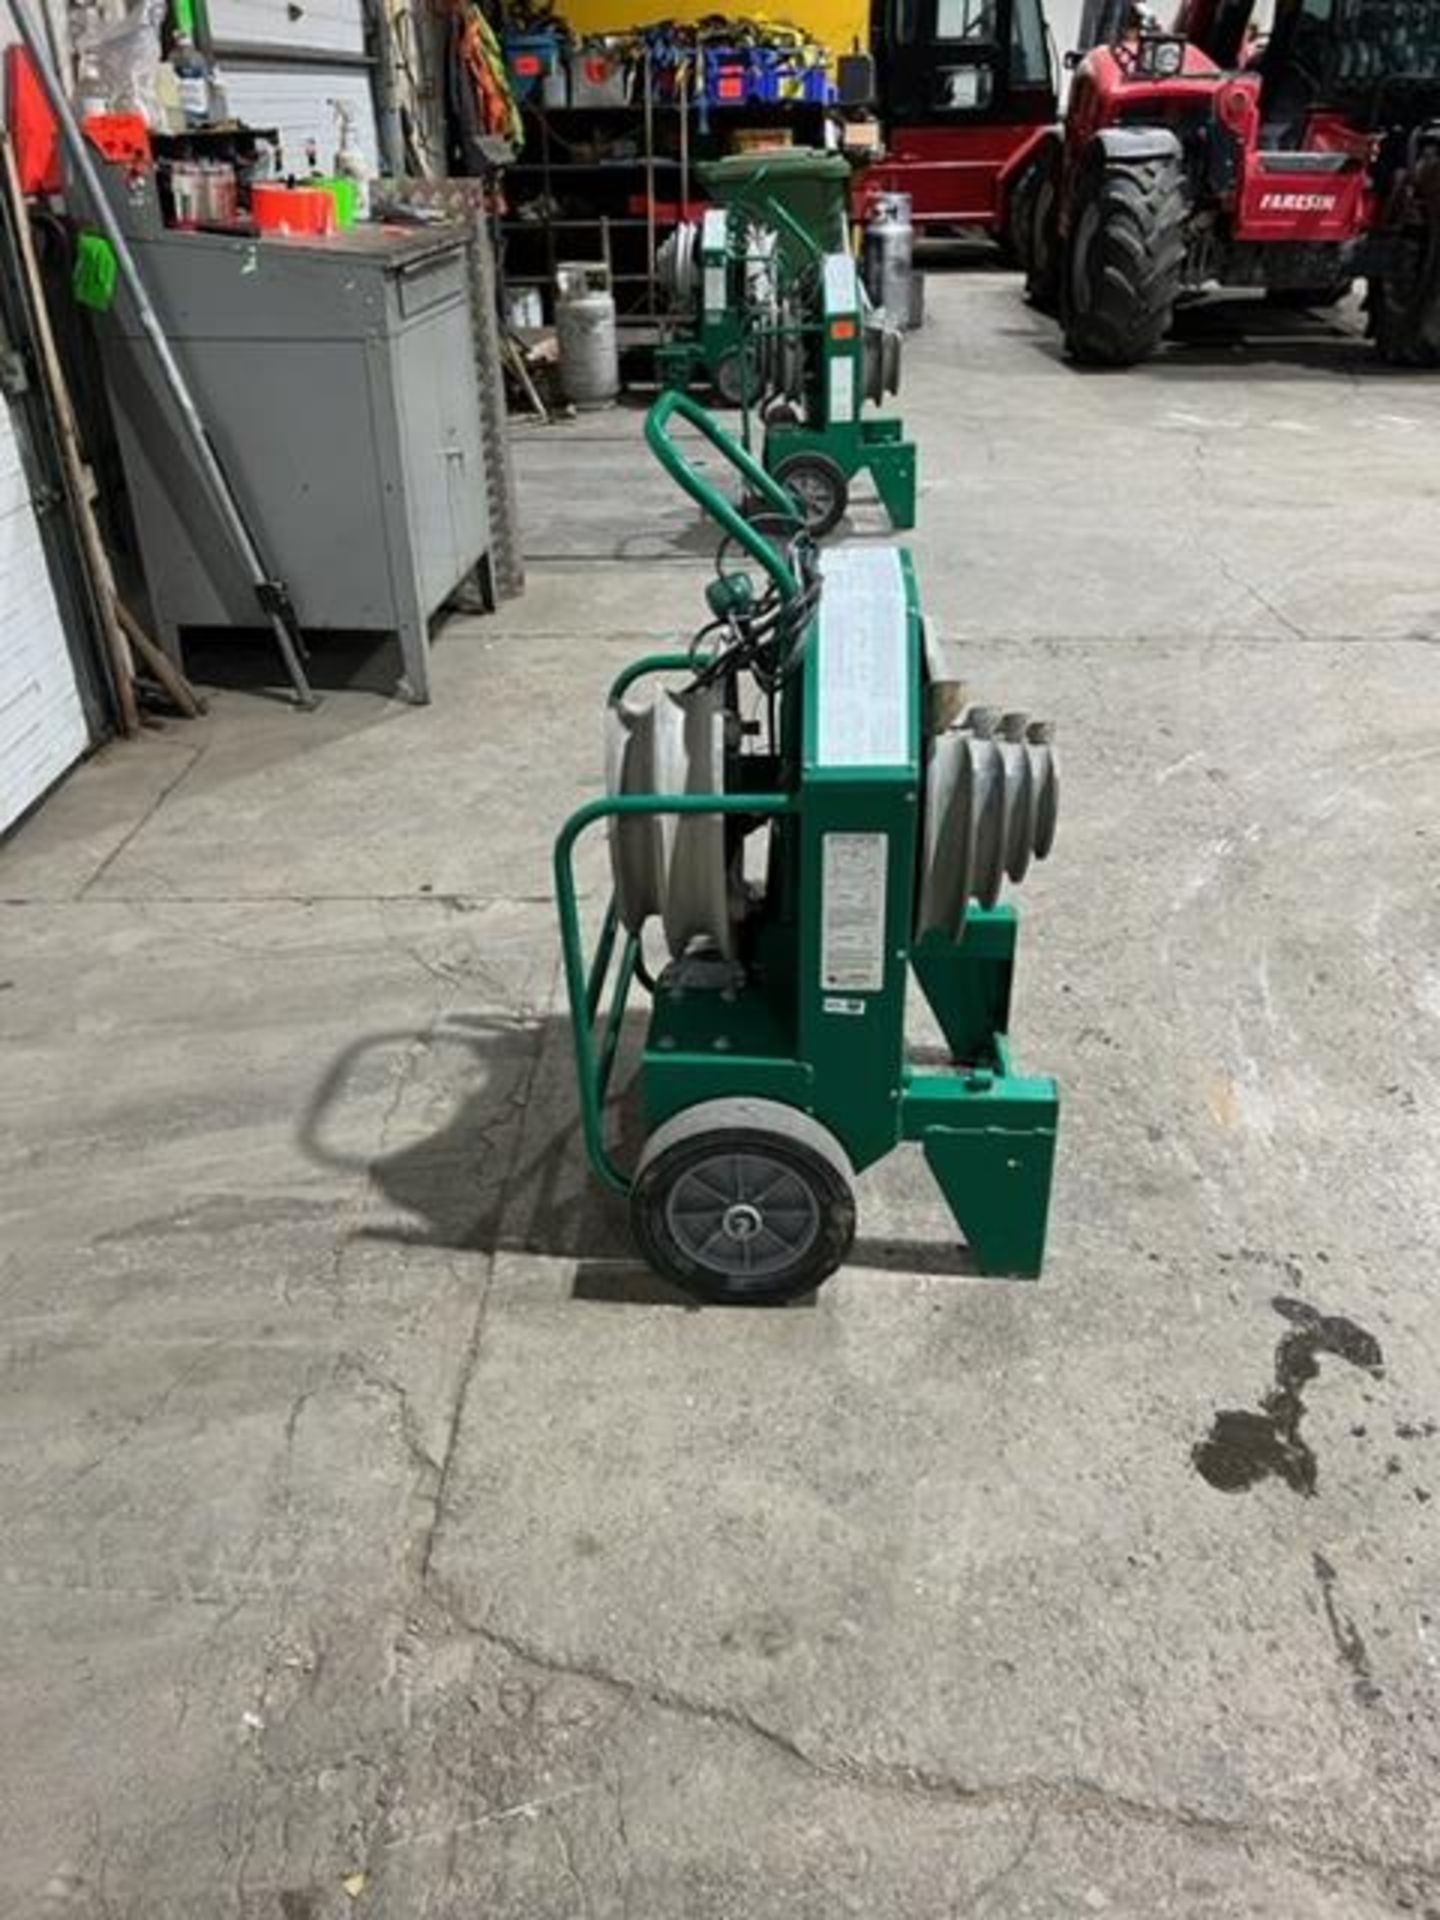 MINT Greenlee model 555C Electric Conduit Pipe Bender 1/2-2" capacity Unit with Die Complete 120V - Image 3 of 3